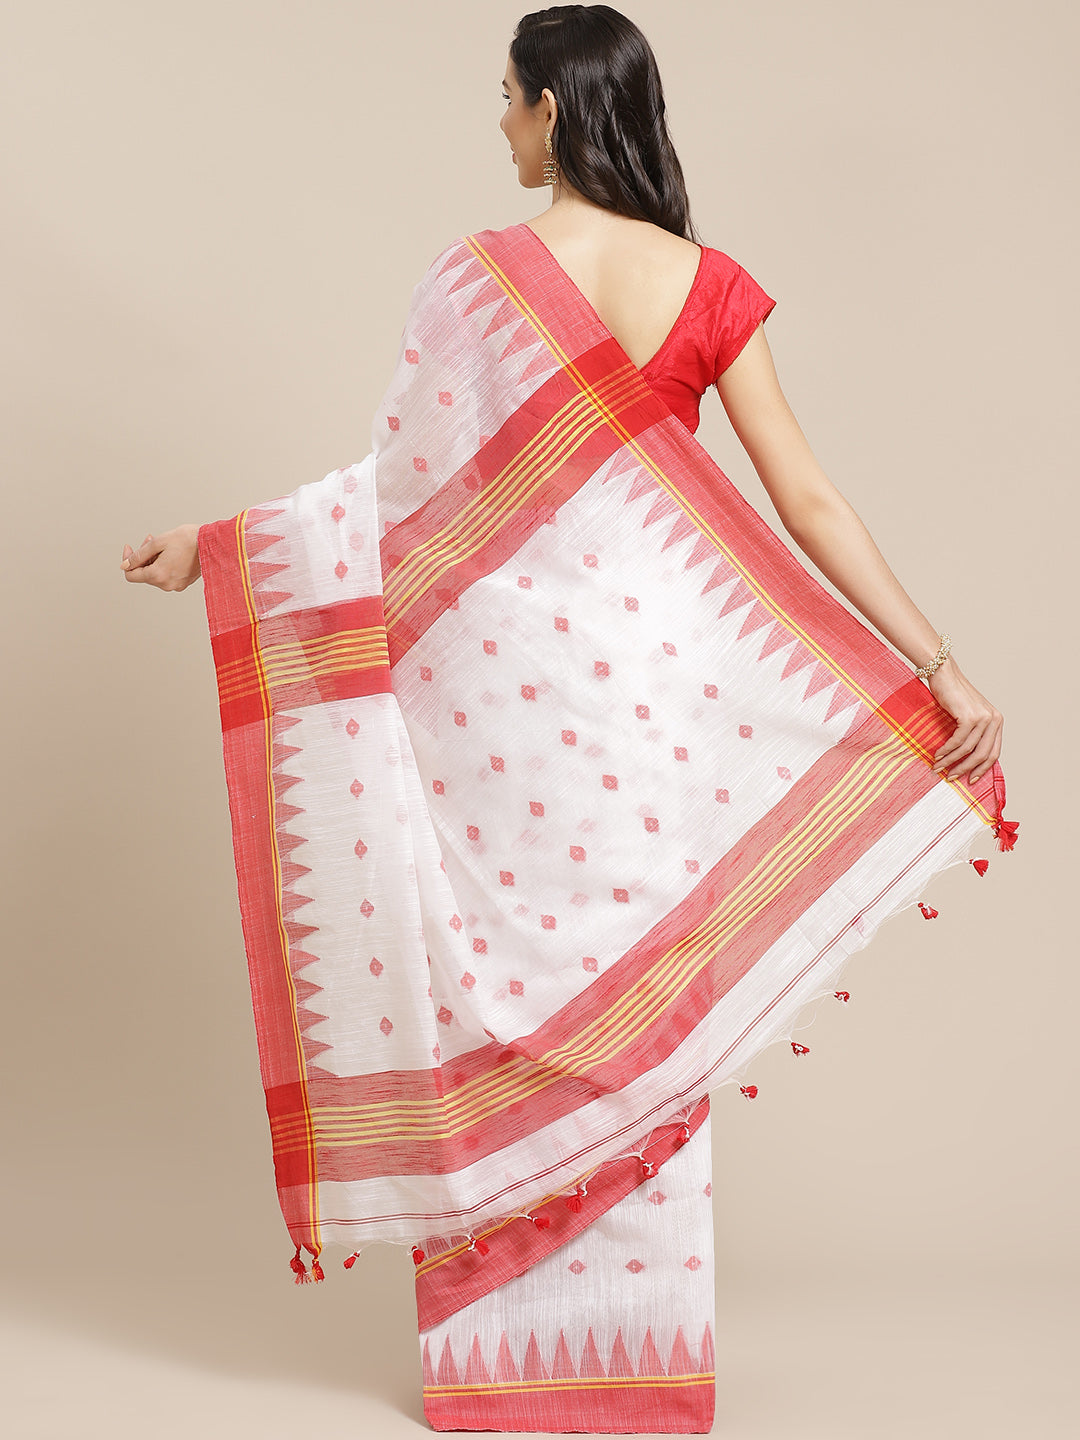 White and Red, Kalakari India Ikat Silk Cotton Woven Design Saree with Blouse SHBESA0036-Saree-Kalakari India-SHBESA0036-Bengal, Cotton, Geographical Indication, Hand Crafted, Heritage Prints, Ikkat, Natural Dyes, Red, Sarees, Sustainable Fabrics, Woven, Yellow-[Linen,Ethnic,wear,Fashionista,Handloom,Handicraft,Indigo,blockprint,block,print,Cotton,Chanderi,Blue, latest,classy,party,bollywood,trendy,summer,style,traditional,formal,elegant,unique,style,hand,block,print, dabu,booti,gift,present,gla